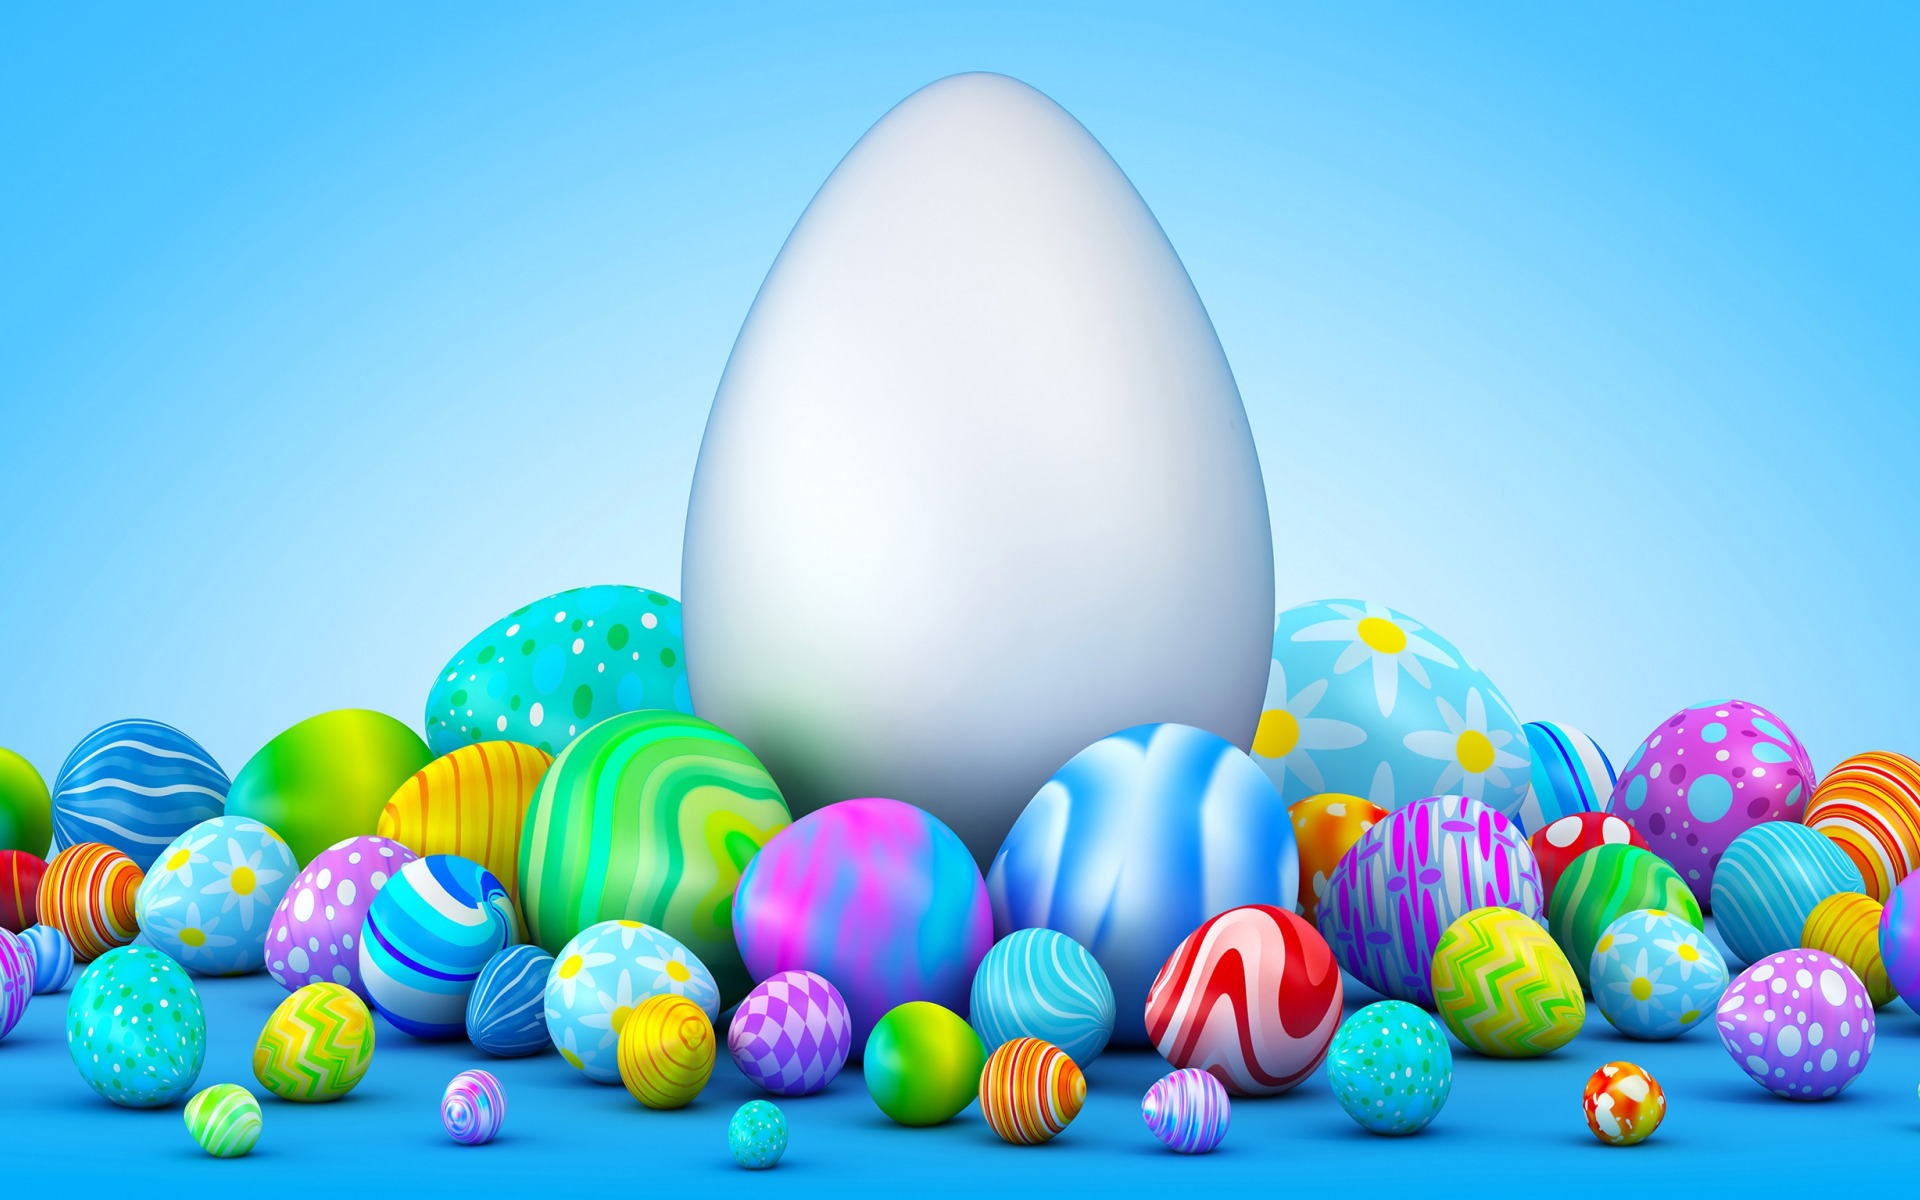 Download wallpaper Easter, blue background, 3D Easter eggs, decoration, art for desktop with resolution 1920x1200. High Quality HD picture wallpaper